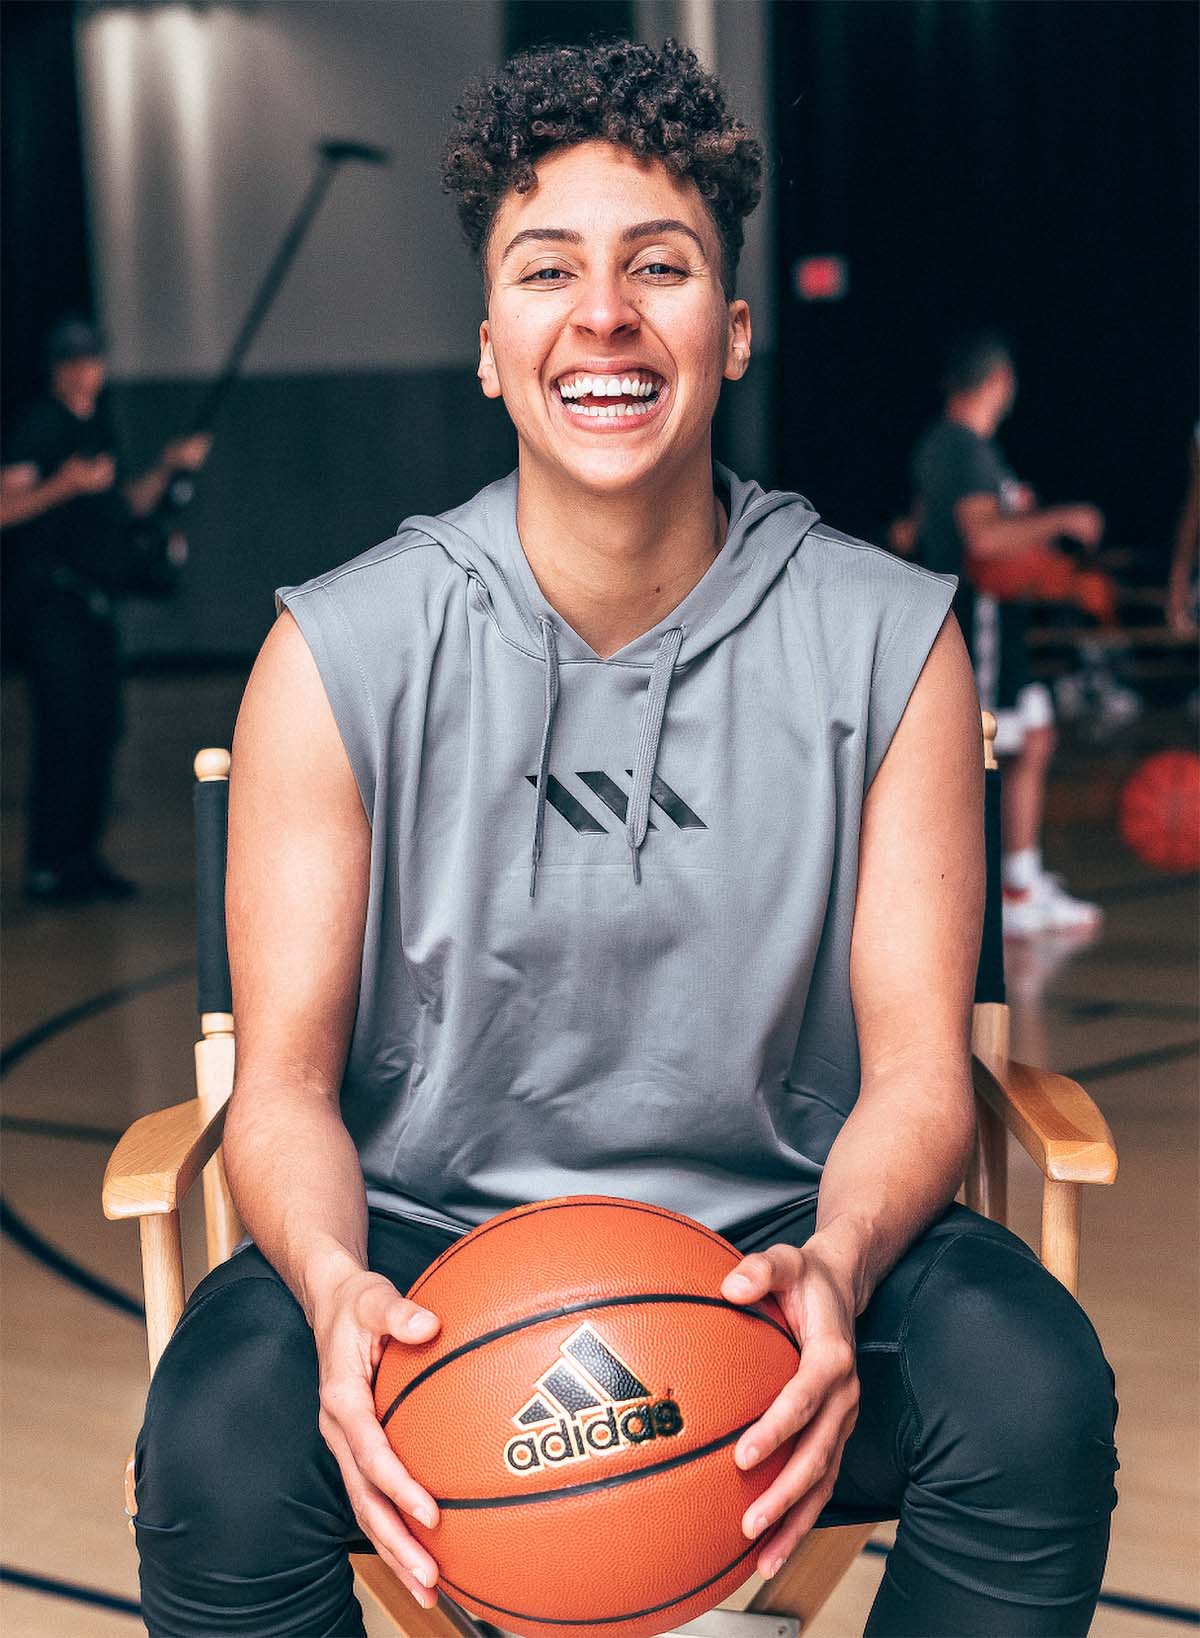 Layshia Clarendon holds a basketball and grins while she poses for a portrait.